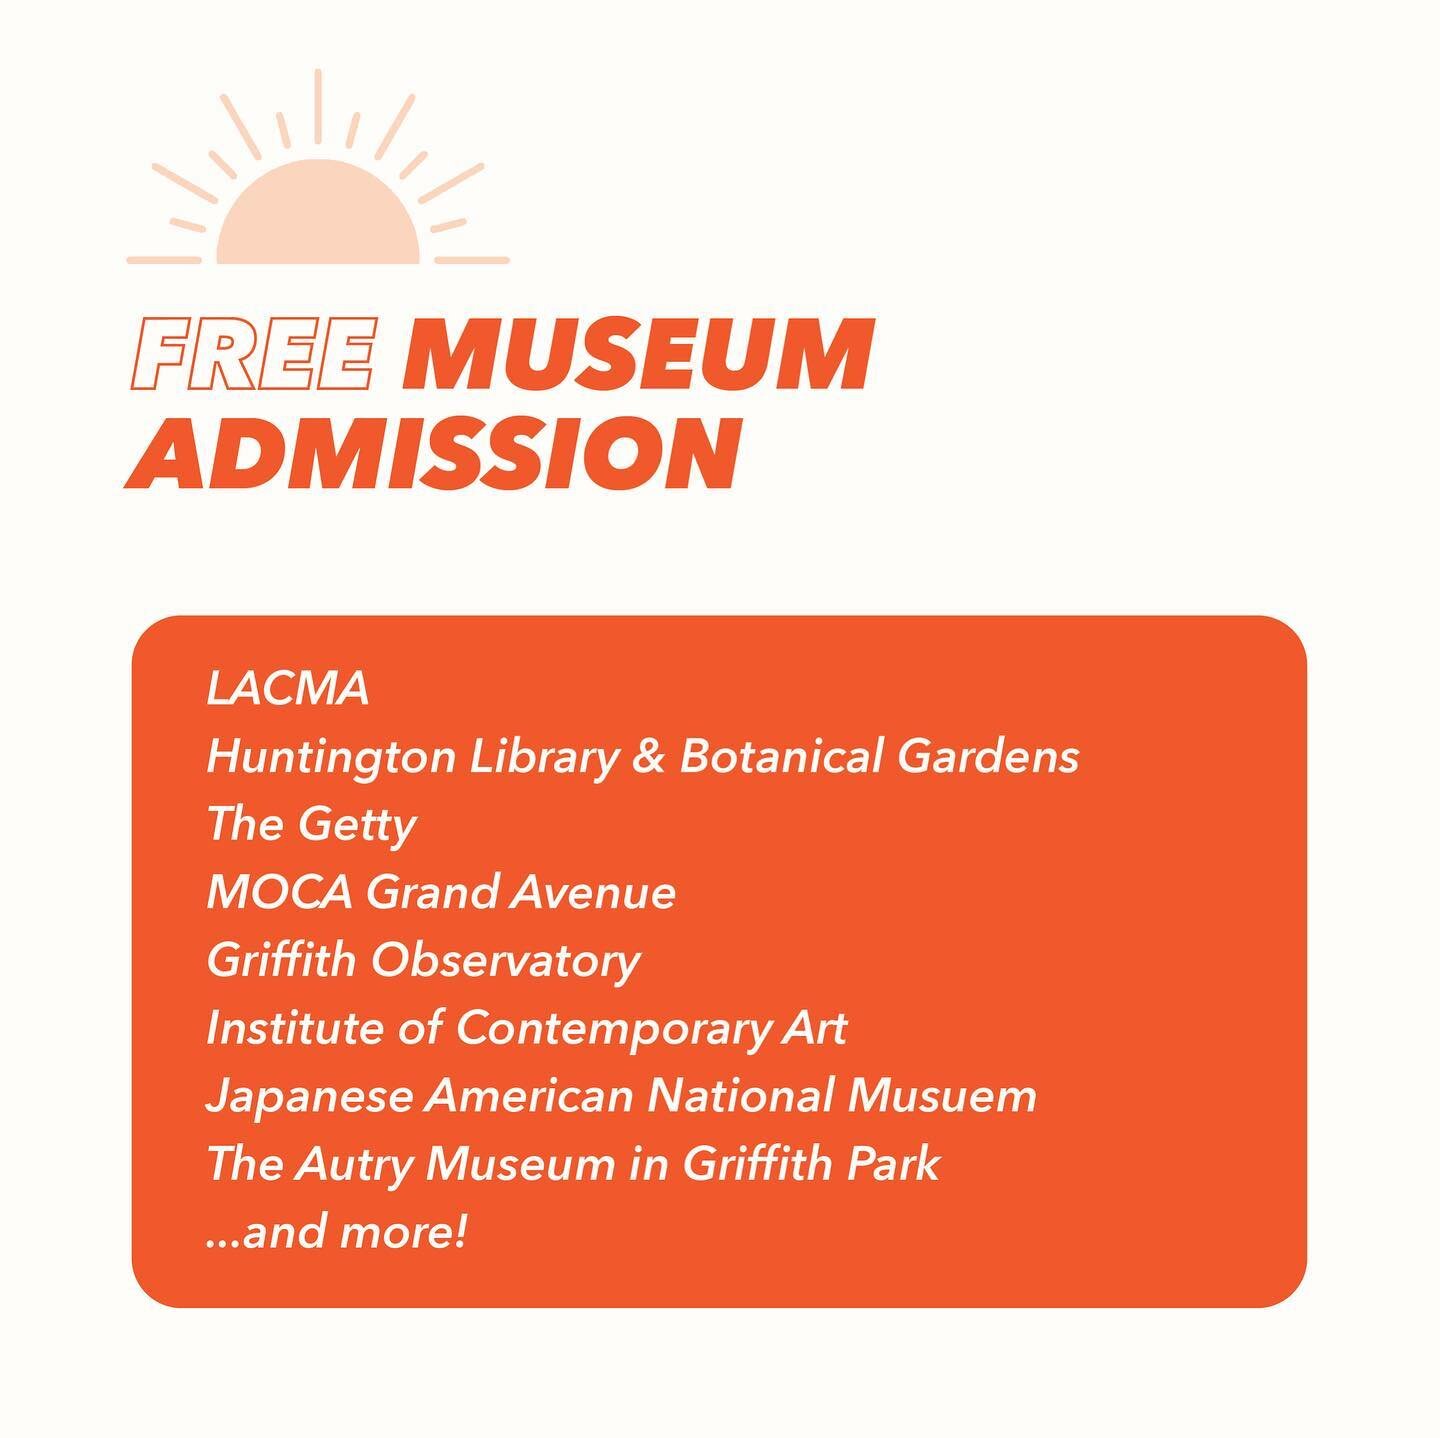 This week, we&rsquo;re sharing free museum experiences in LA! Beat the heat and take your kids out to enjoy the arts, culture, and history our city has to offer. Details are always subject to change, so make sure to check out their website when plann